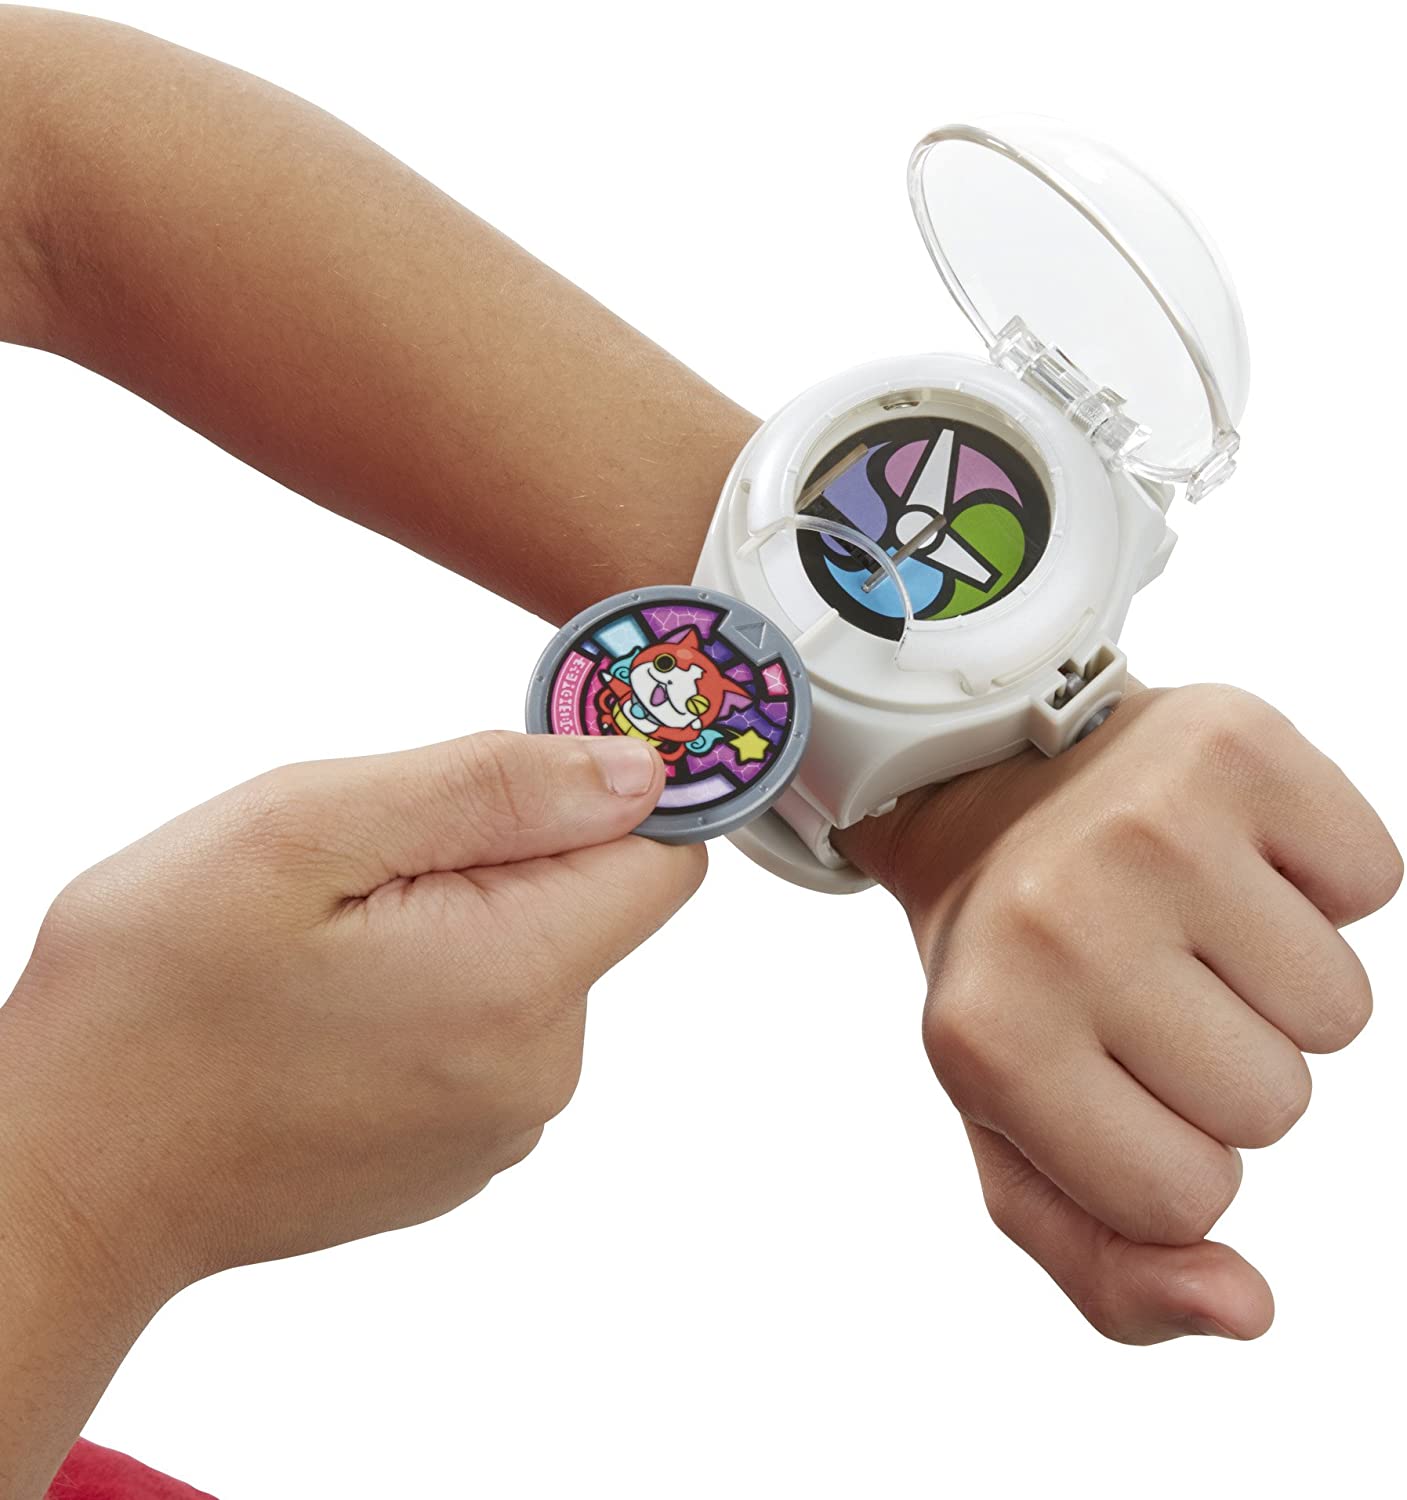 Hasbro Yo-kai Watch Season 1 Watch with 2 Exclusive medals Roleplay Toy